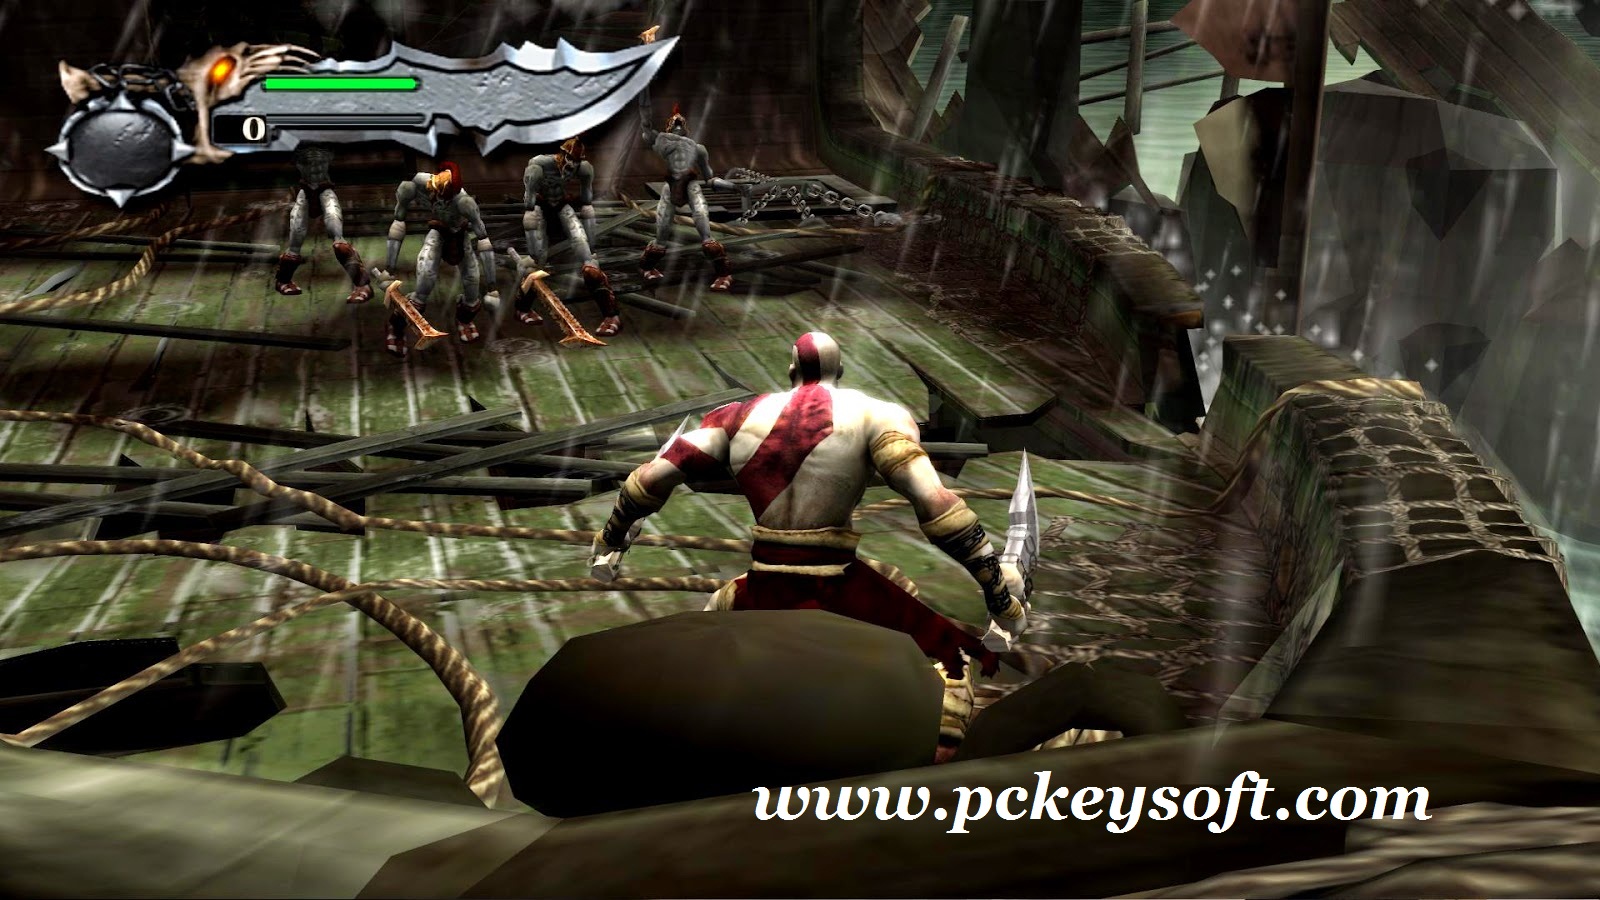 god of war 3 pc game highly compressed free download